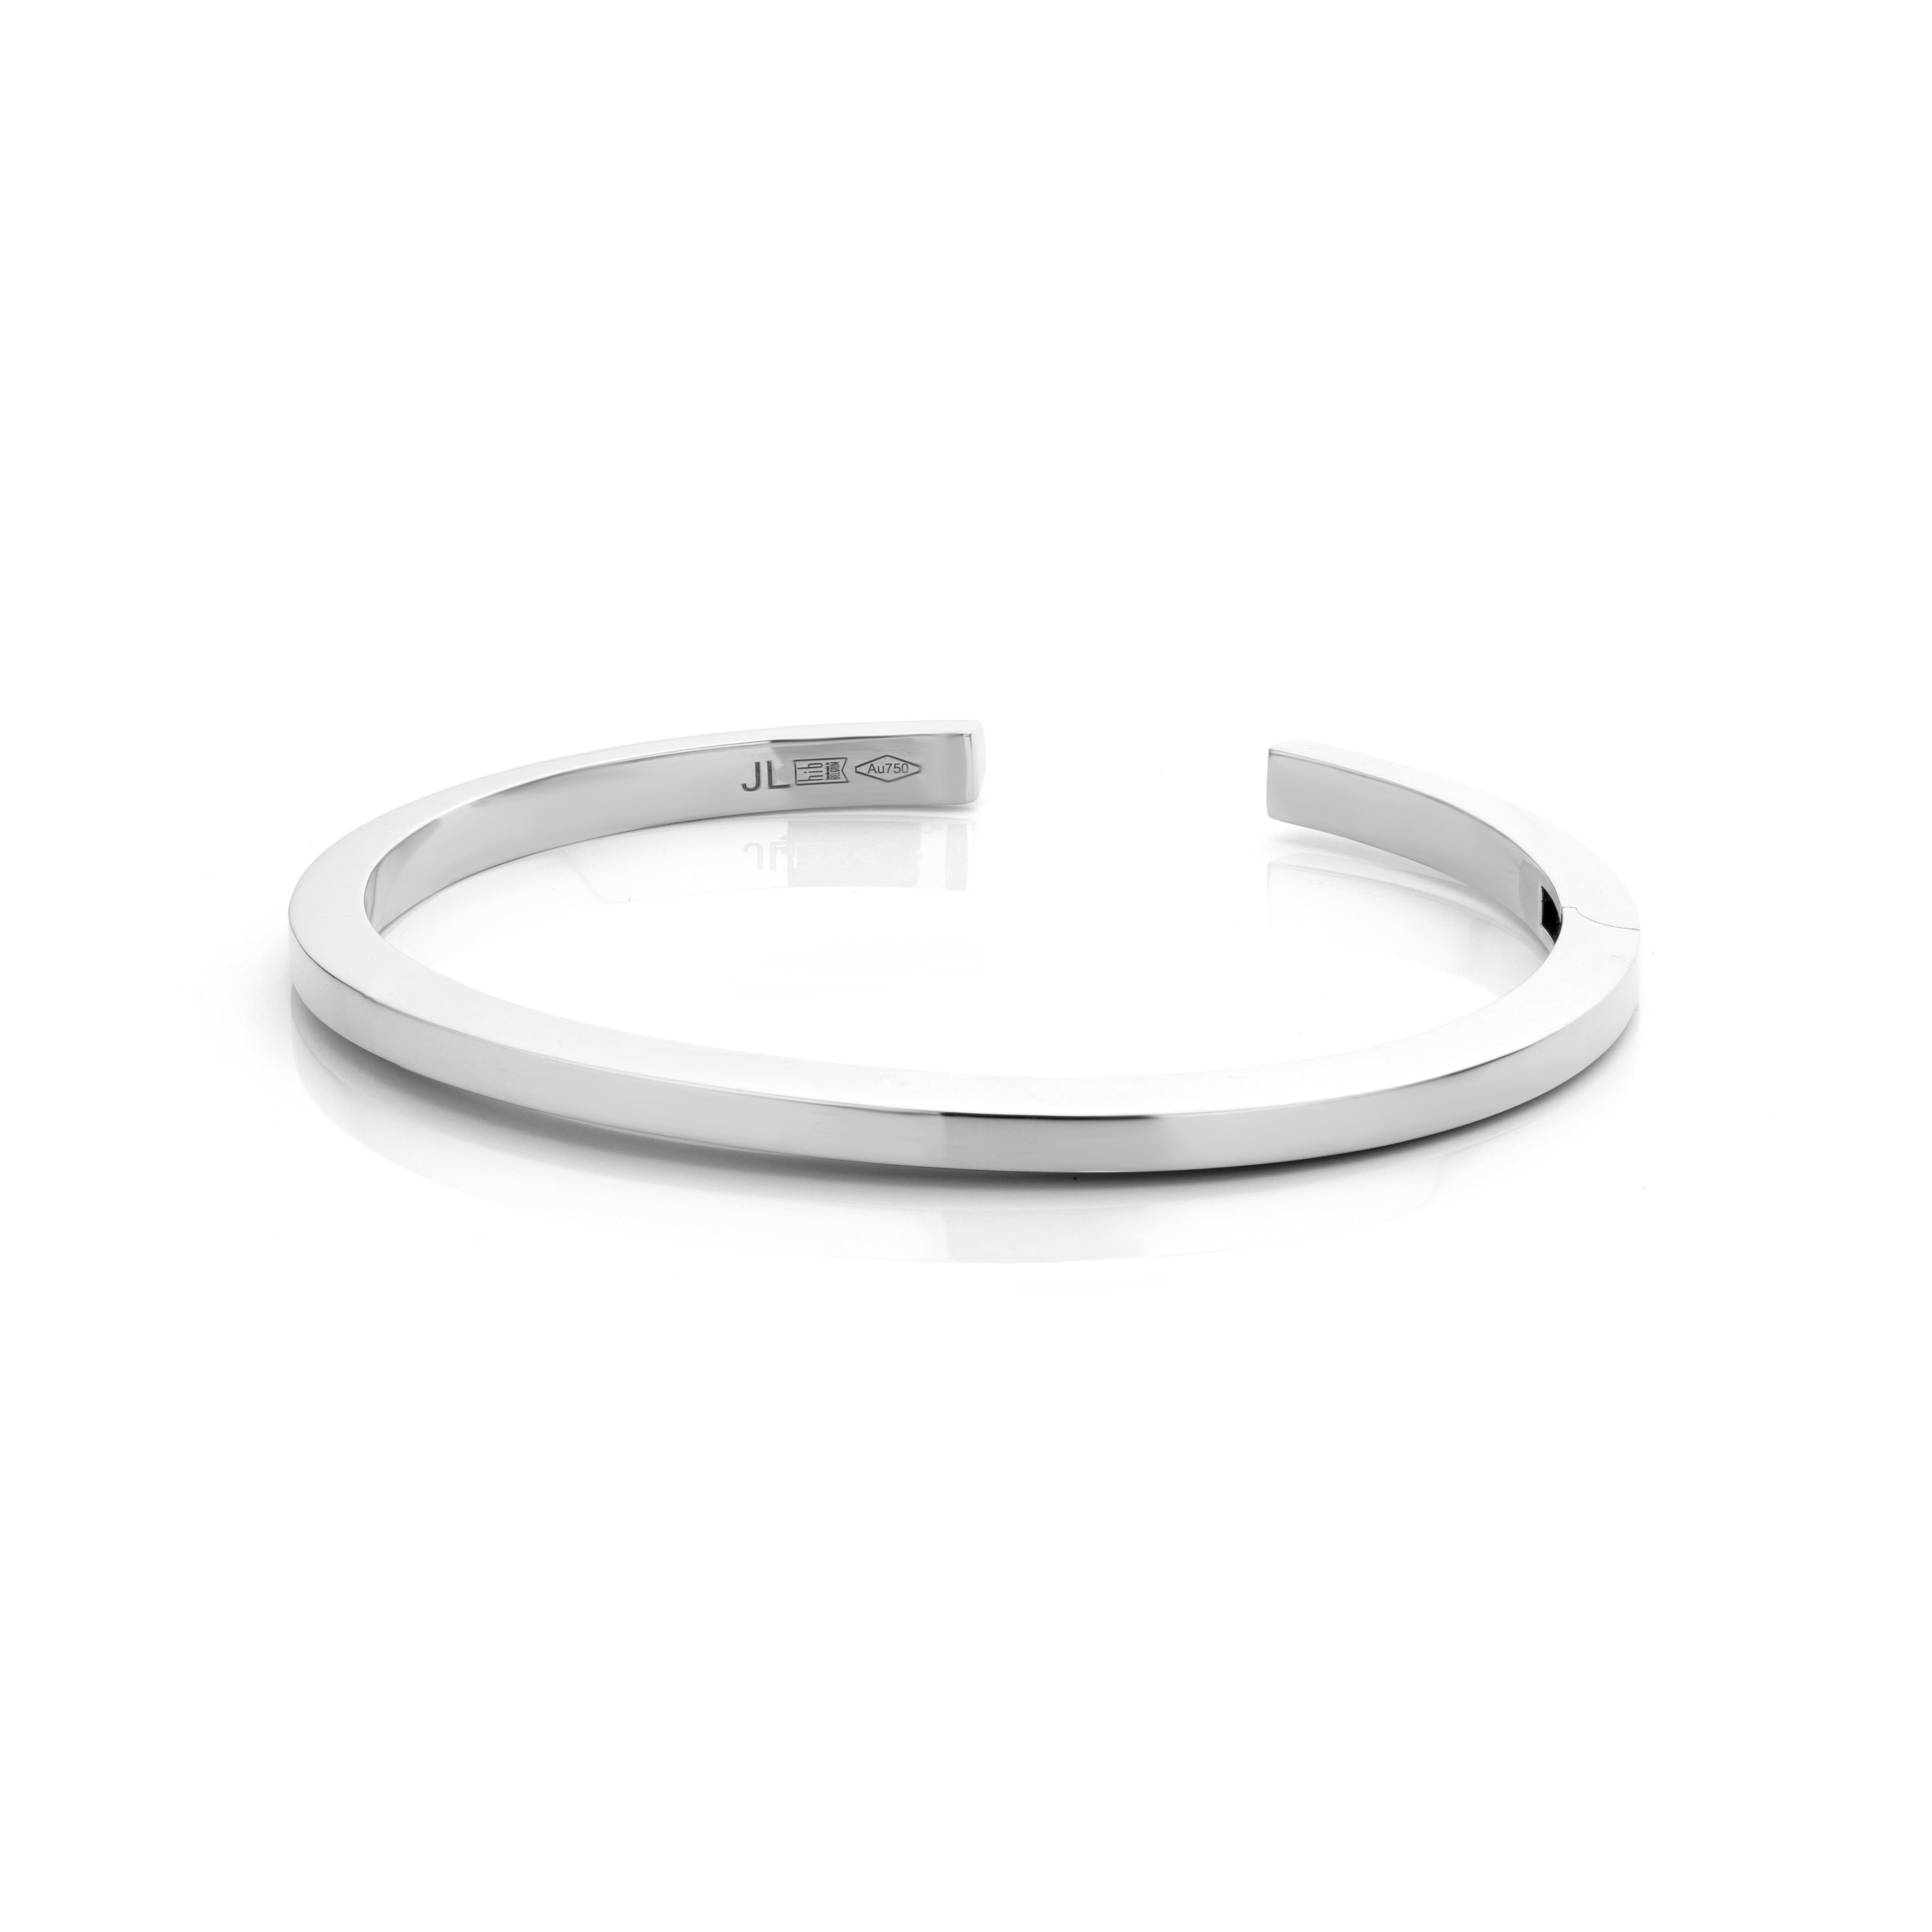 18 Karat White gold Bracelet, completed with a sandblasted surface.

This design is one of Jochen Leen's first designs and is highly recognizable.
This bracelet is well suited to be worn as an every day bracelet and is easy to match with other fine